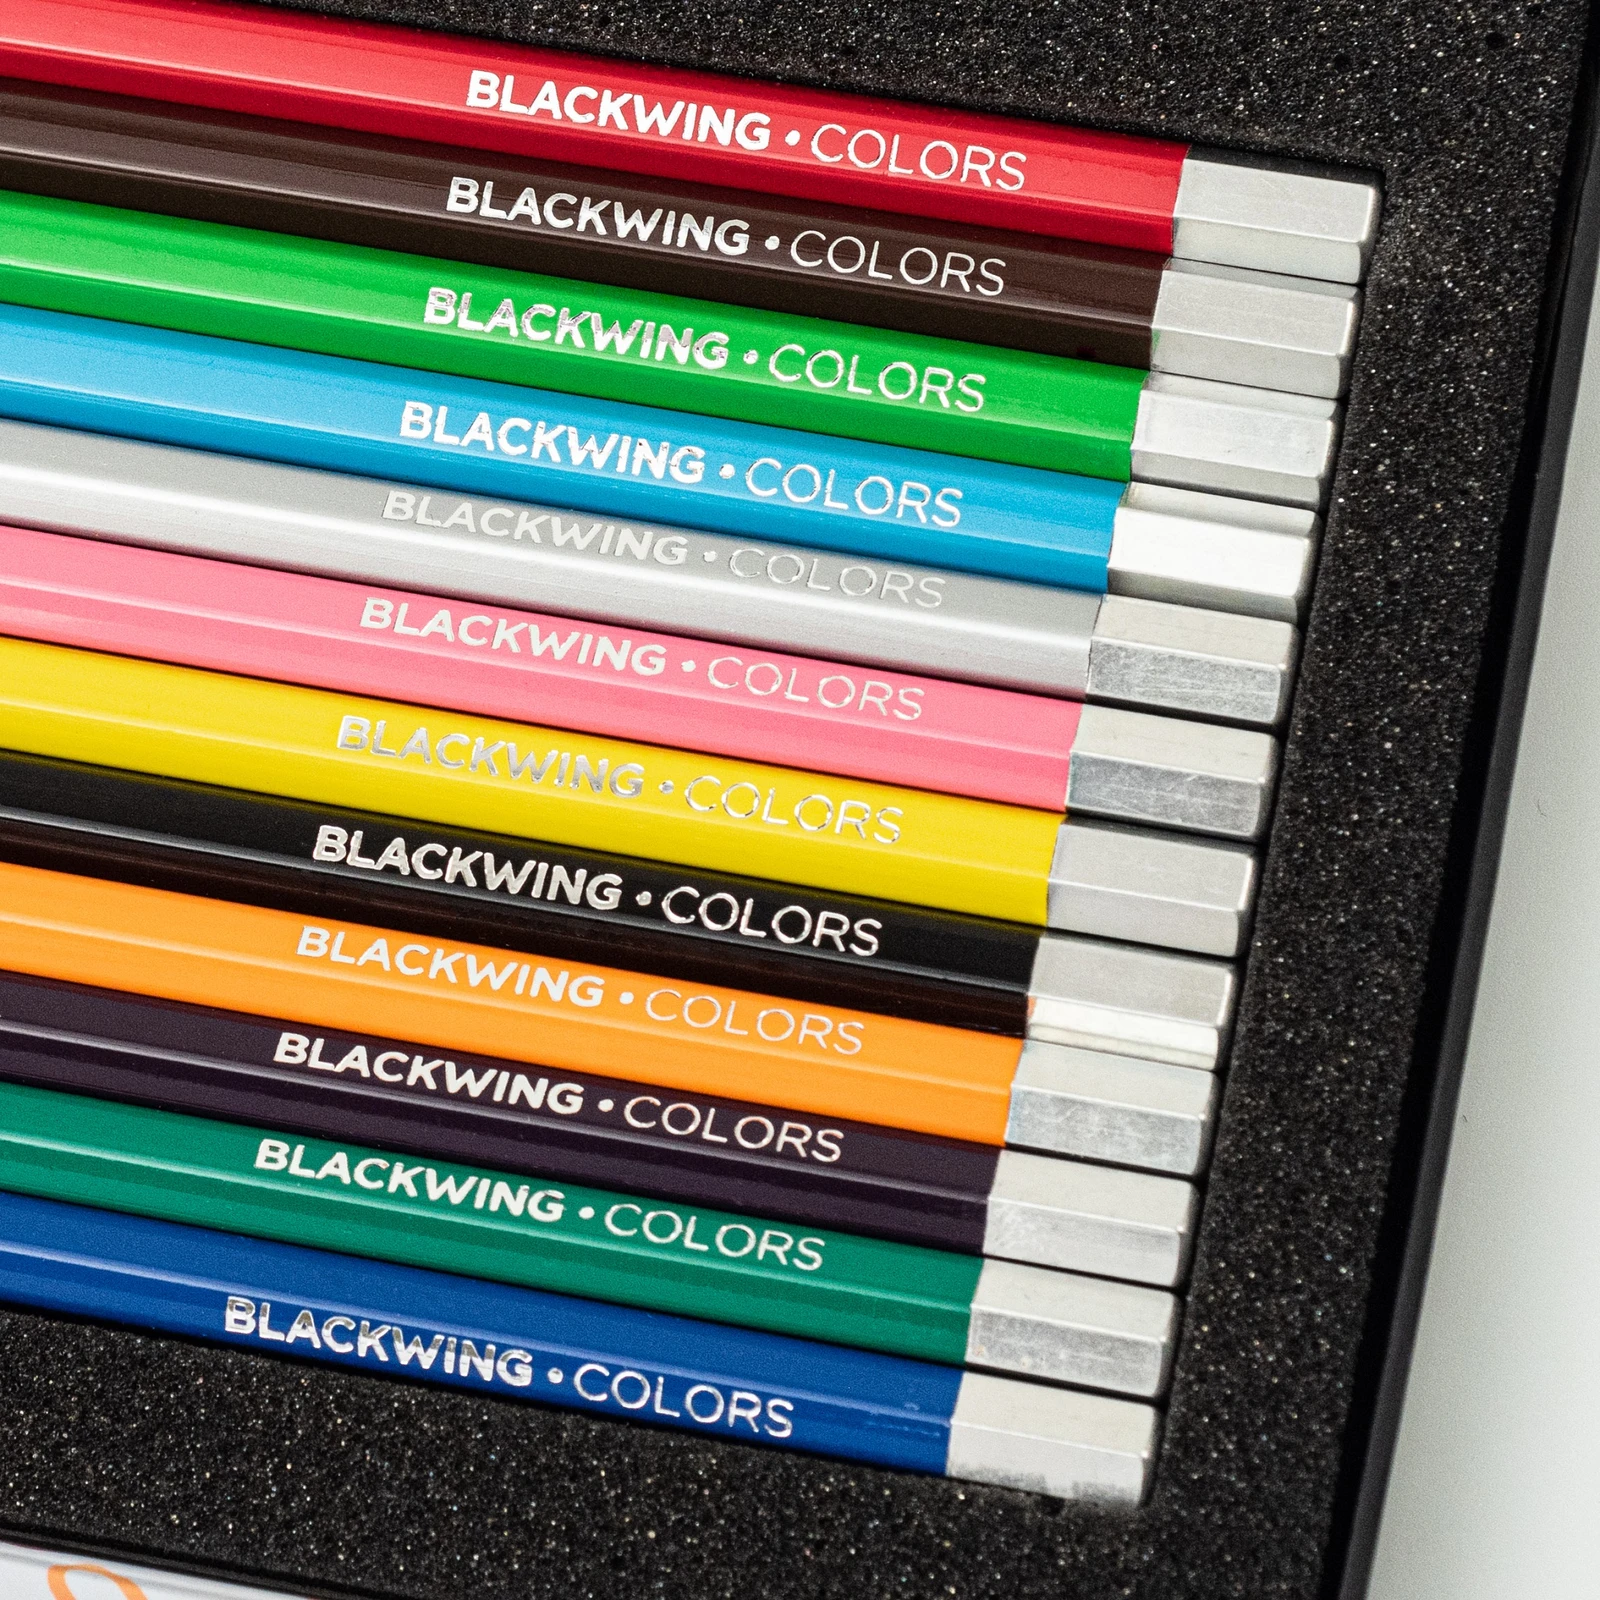 colors 1 resized 1600x - BLACKWING